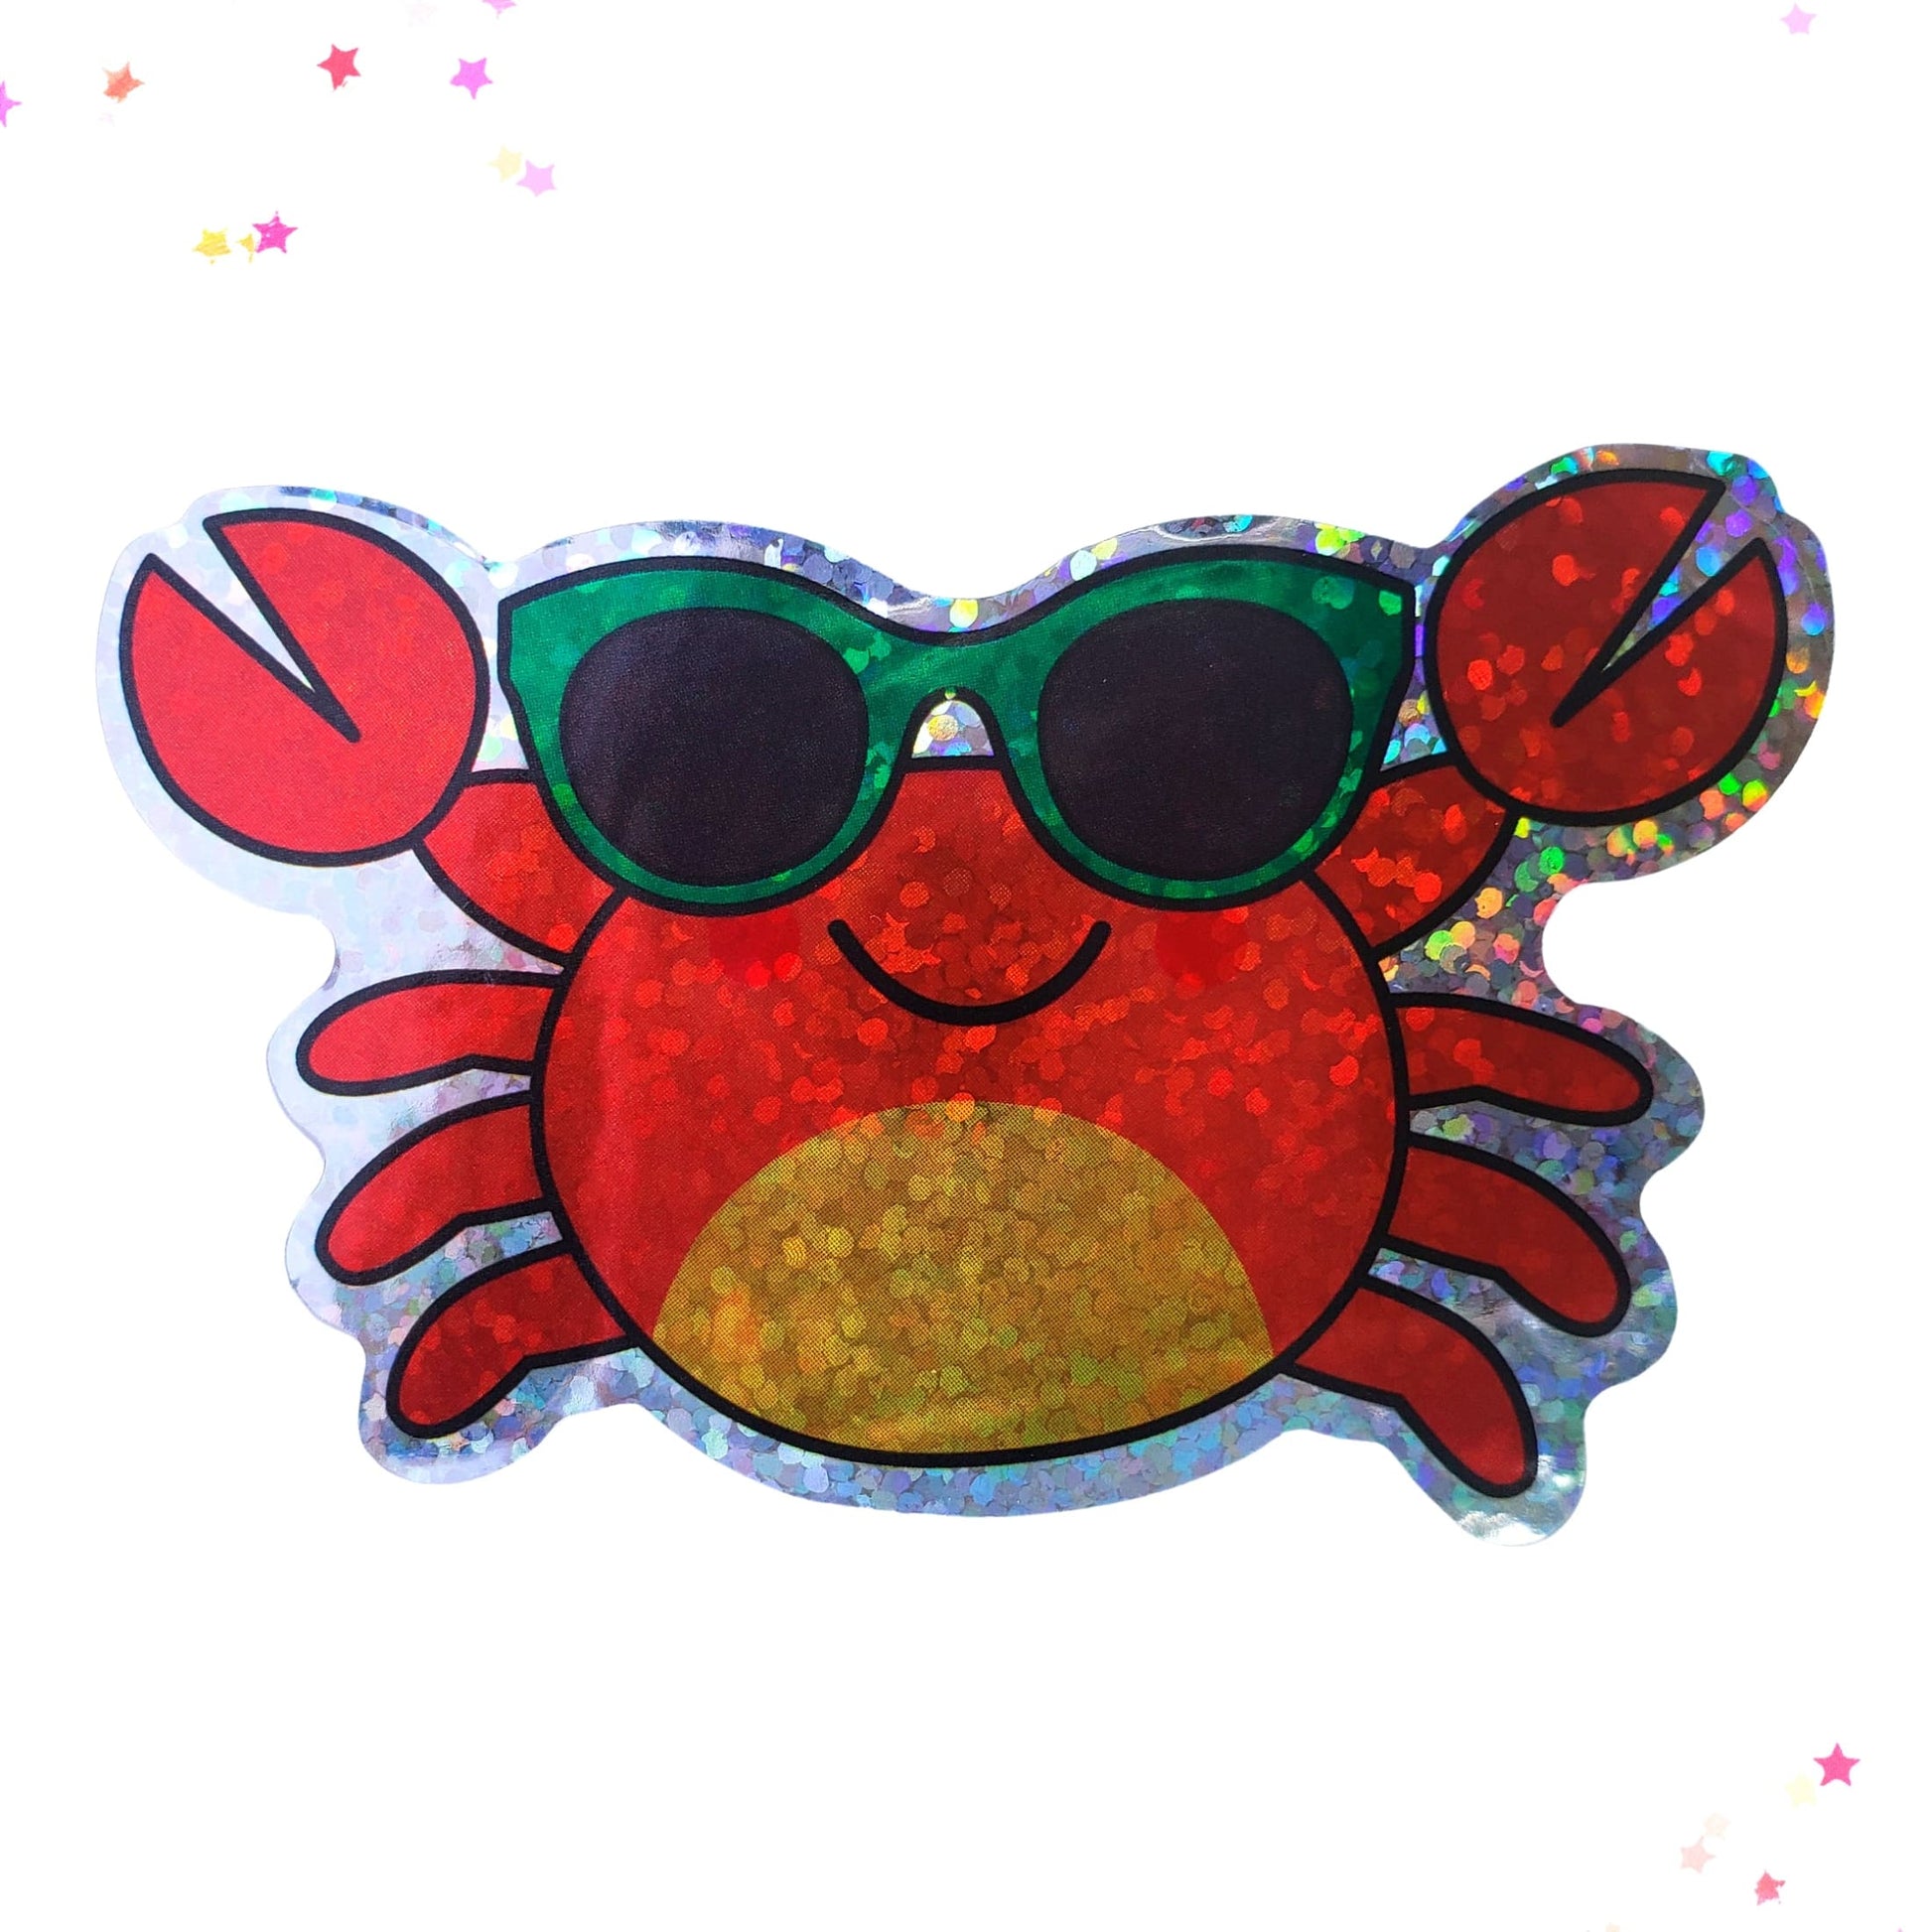 Premium Sticker - Sparkly Holographic Glitter Cute Summertime Crab from Confetti Kitty, Only 2.00